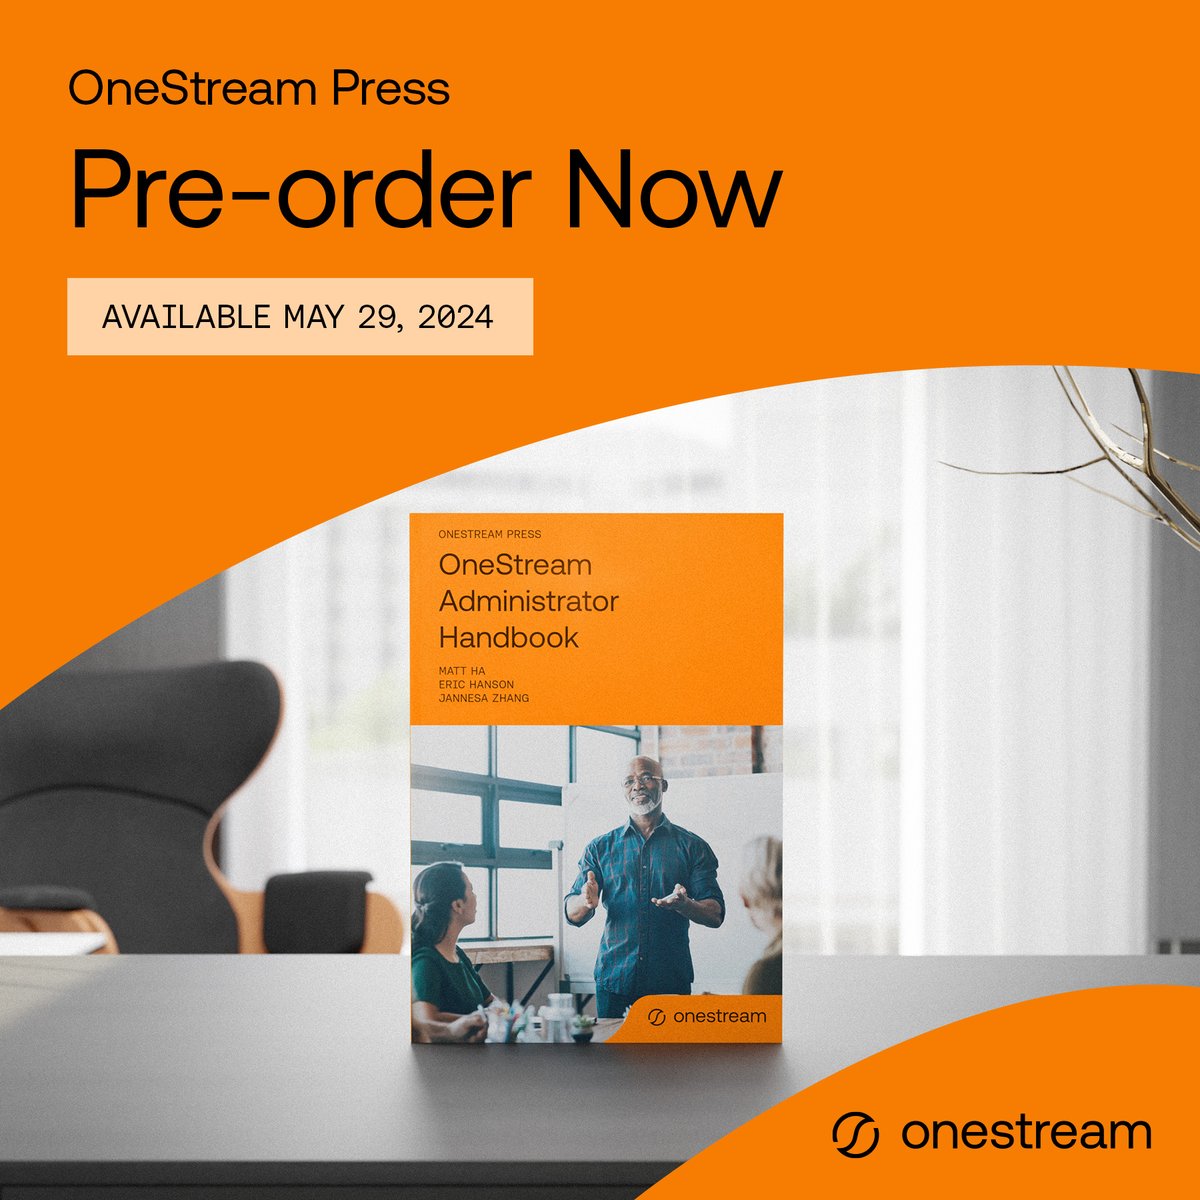 Pre-order now available! Whether you are a novice or seasoned administrator, this book examines key concepts to help you understand and manage the financial and data processes of your OneStream application. ow.ly/cCMQ50RCXBs #Data #FinancialInnovation #Finance